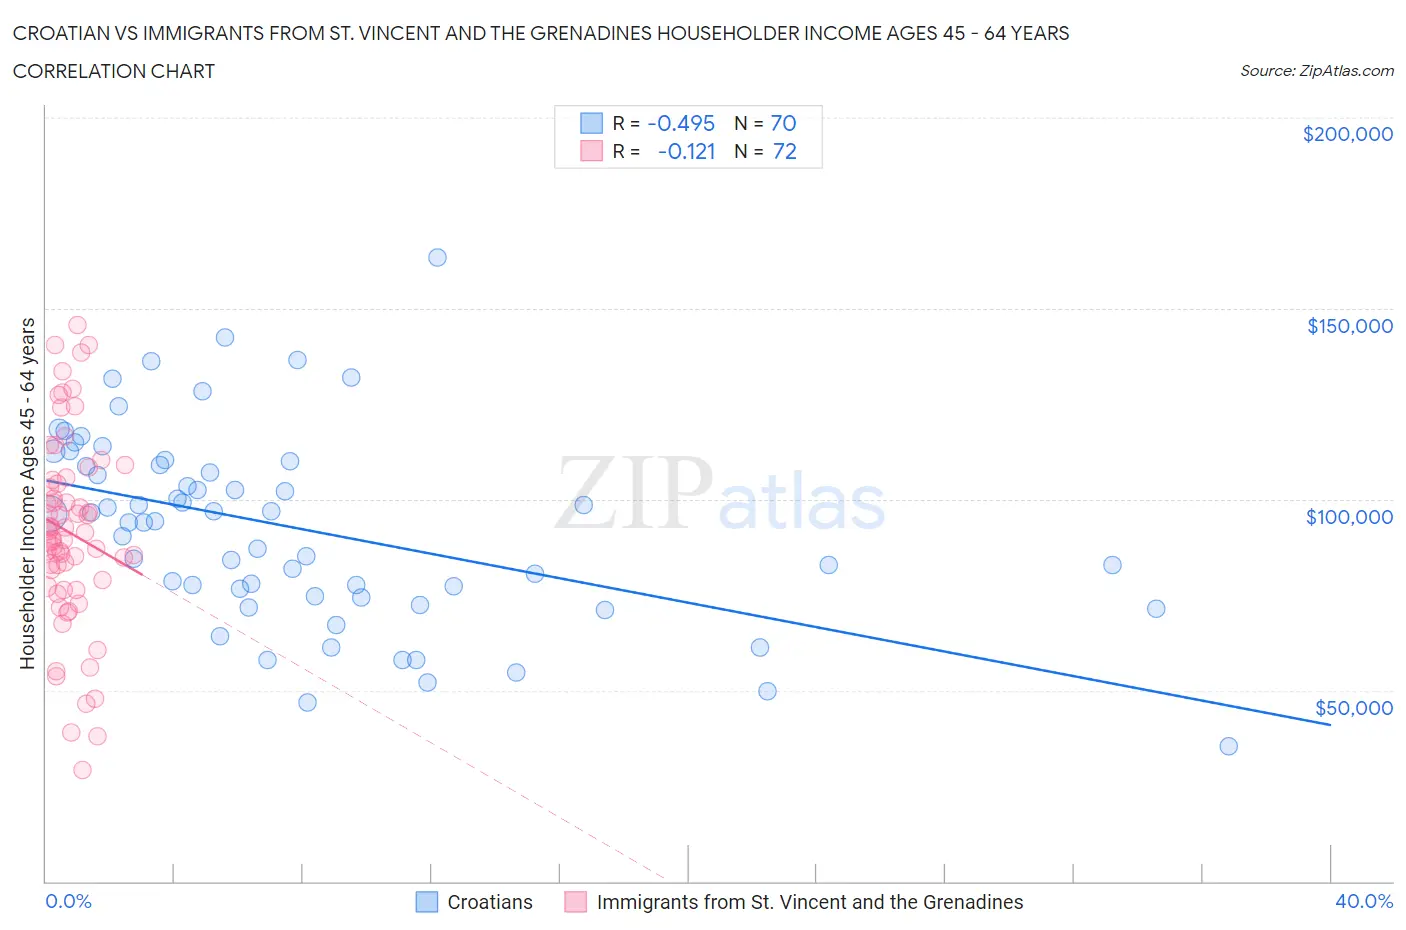 Croatian vs Immigrants from St. Vincent and the Grenadines Householder Income Ages 45 - 64 years